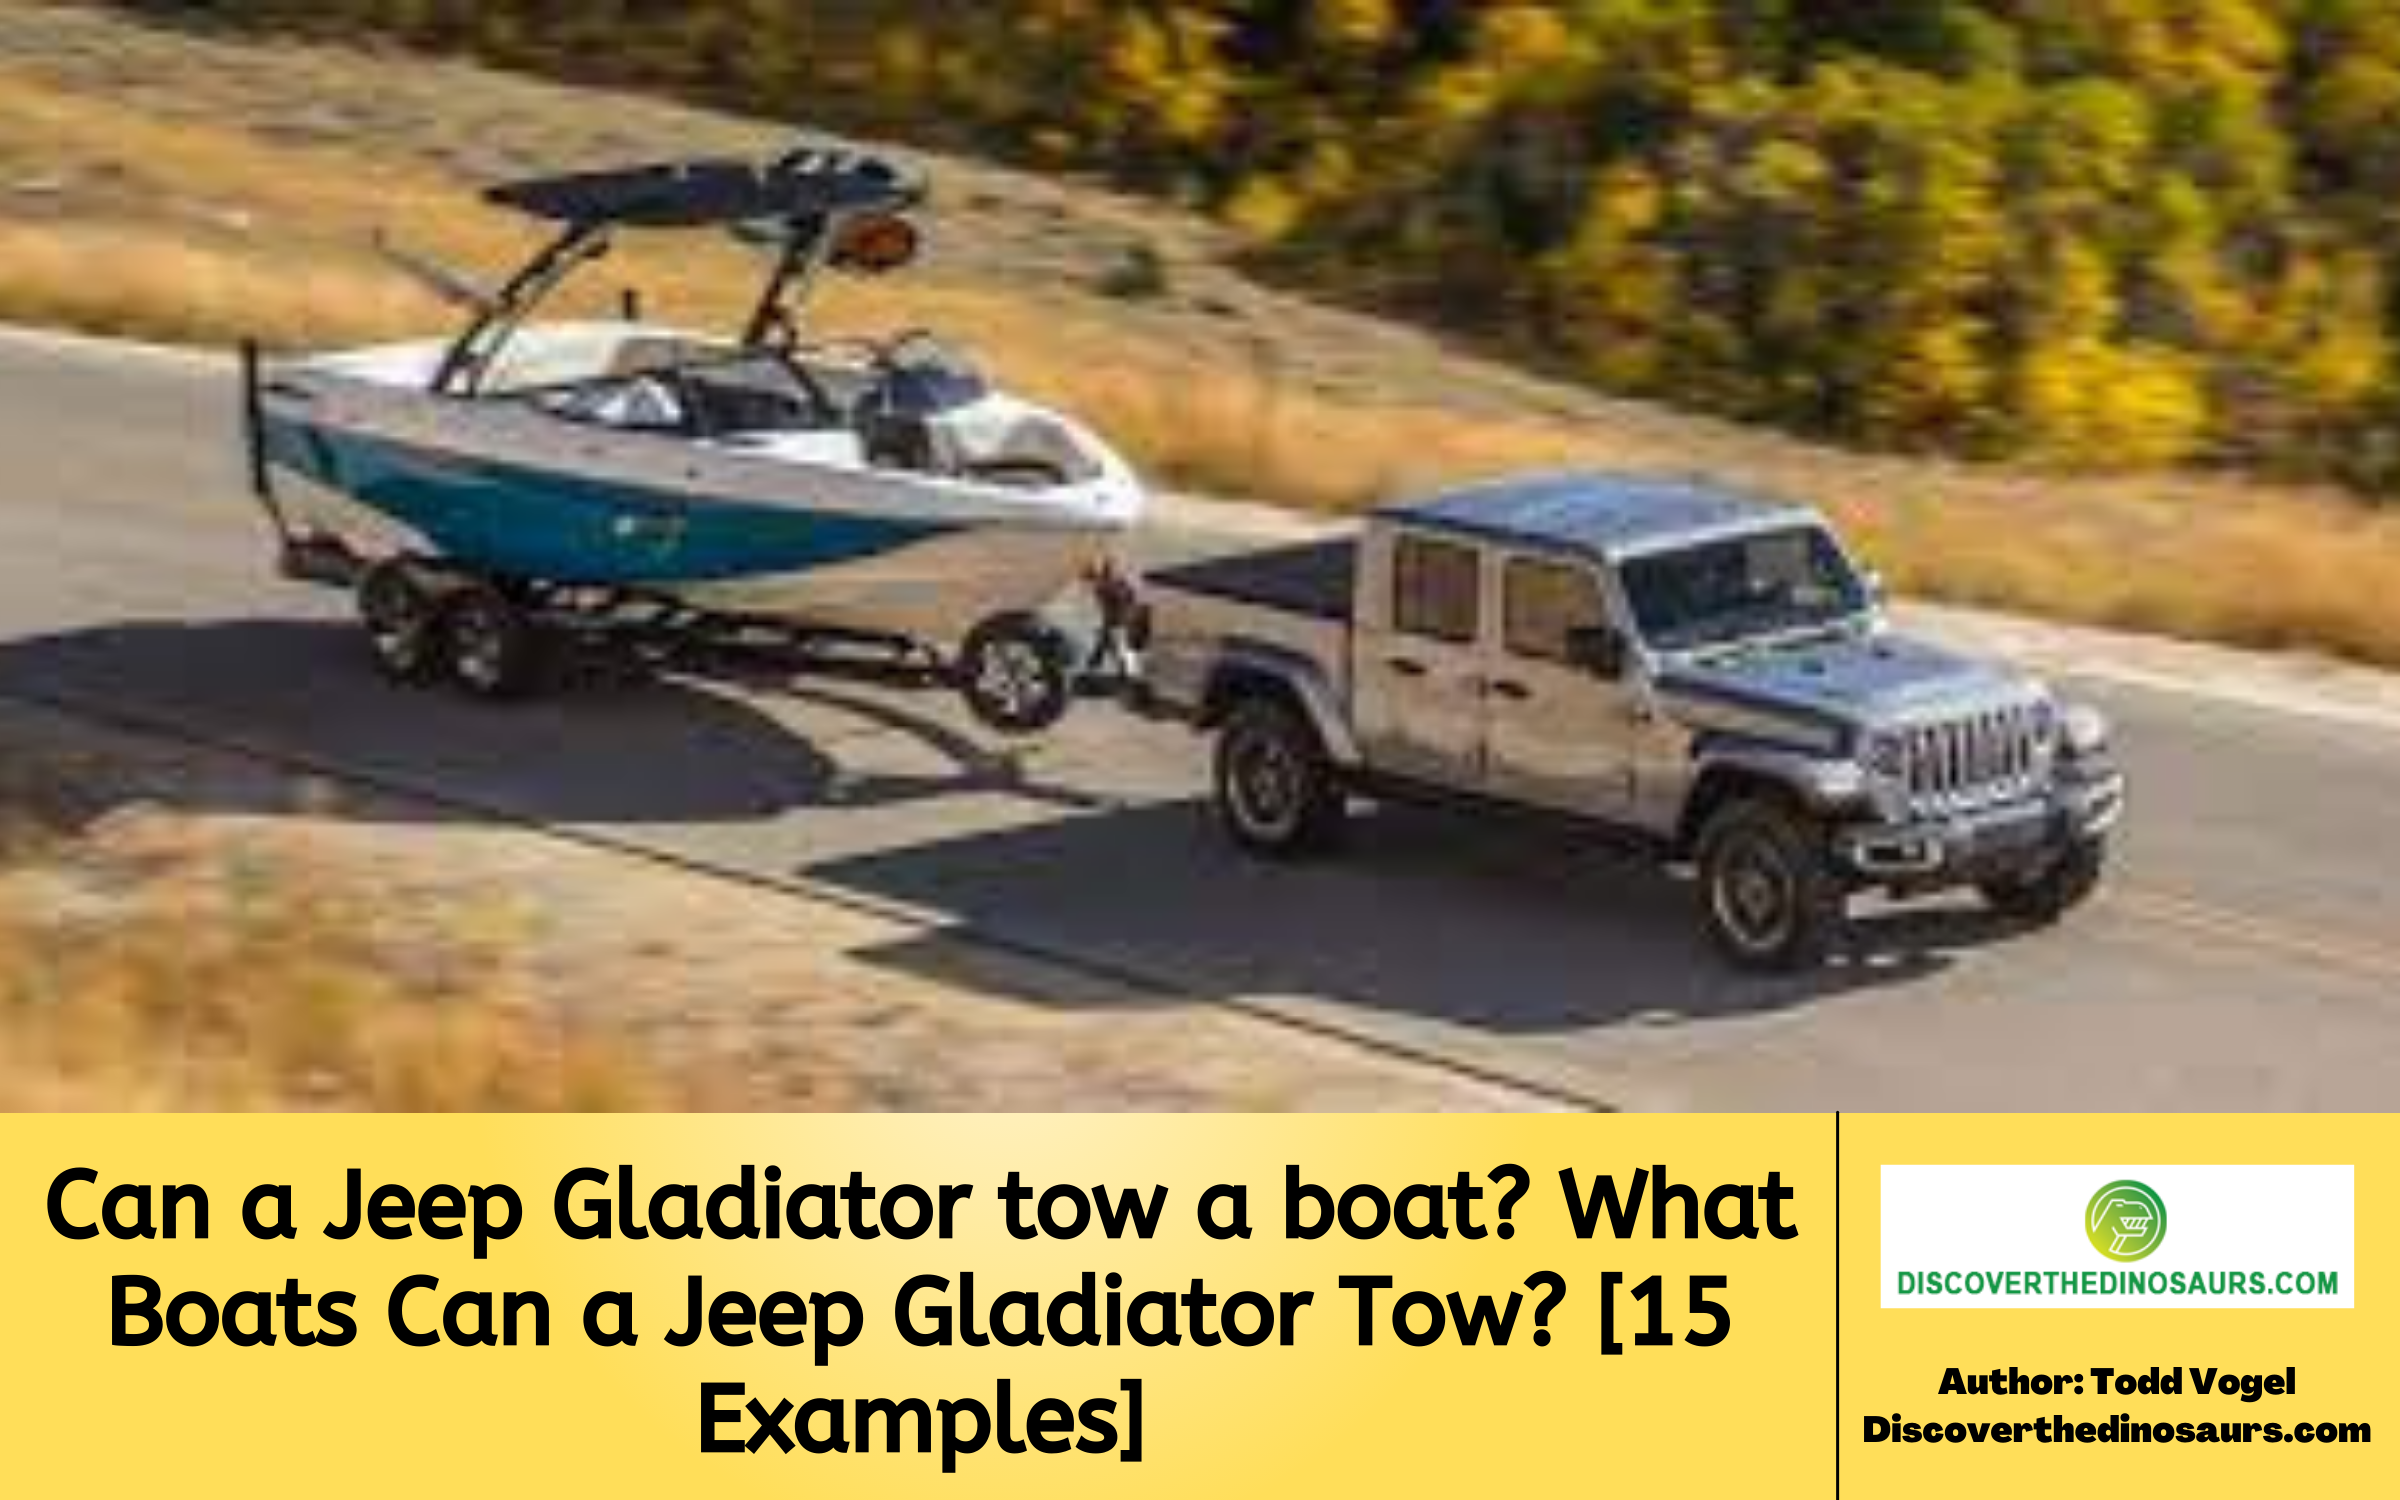 Can a Jeep Gladiator tow a boat?